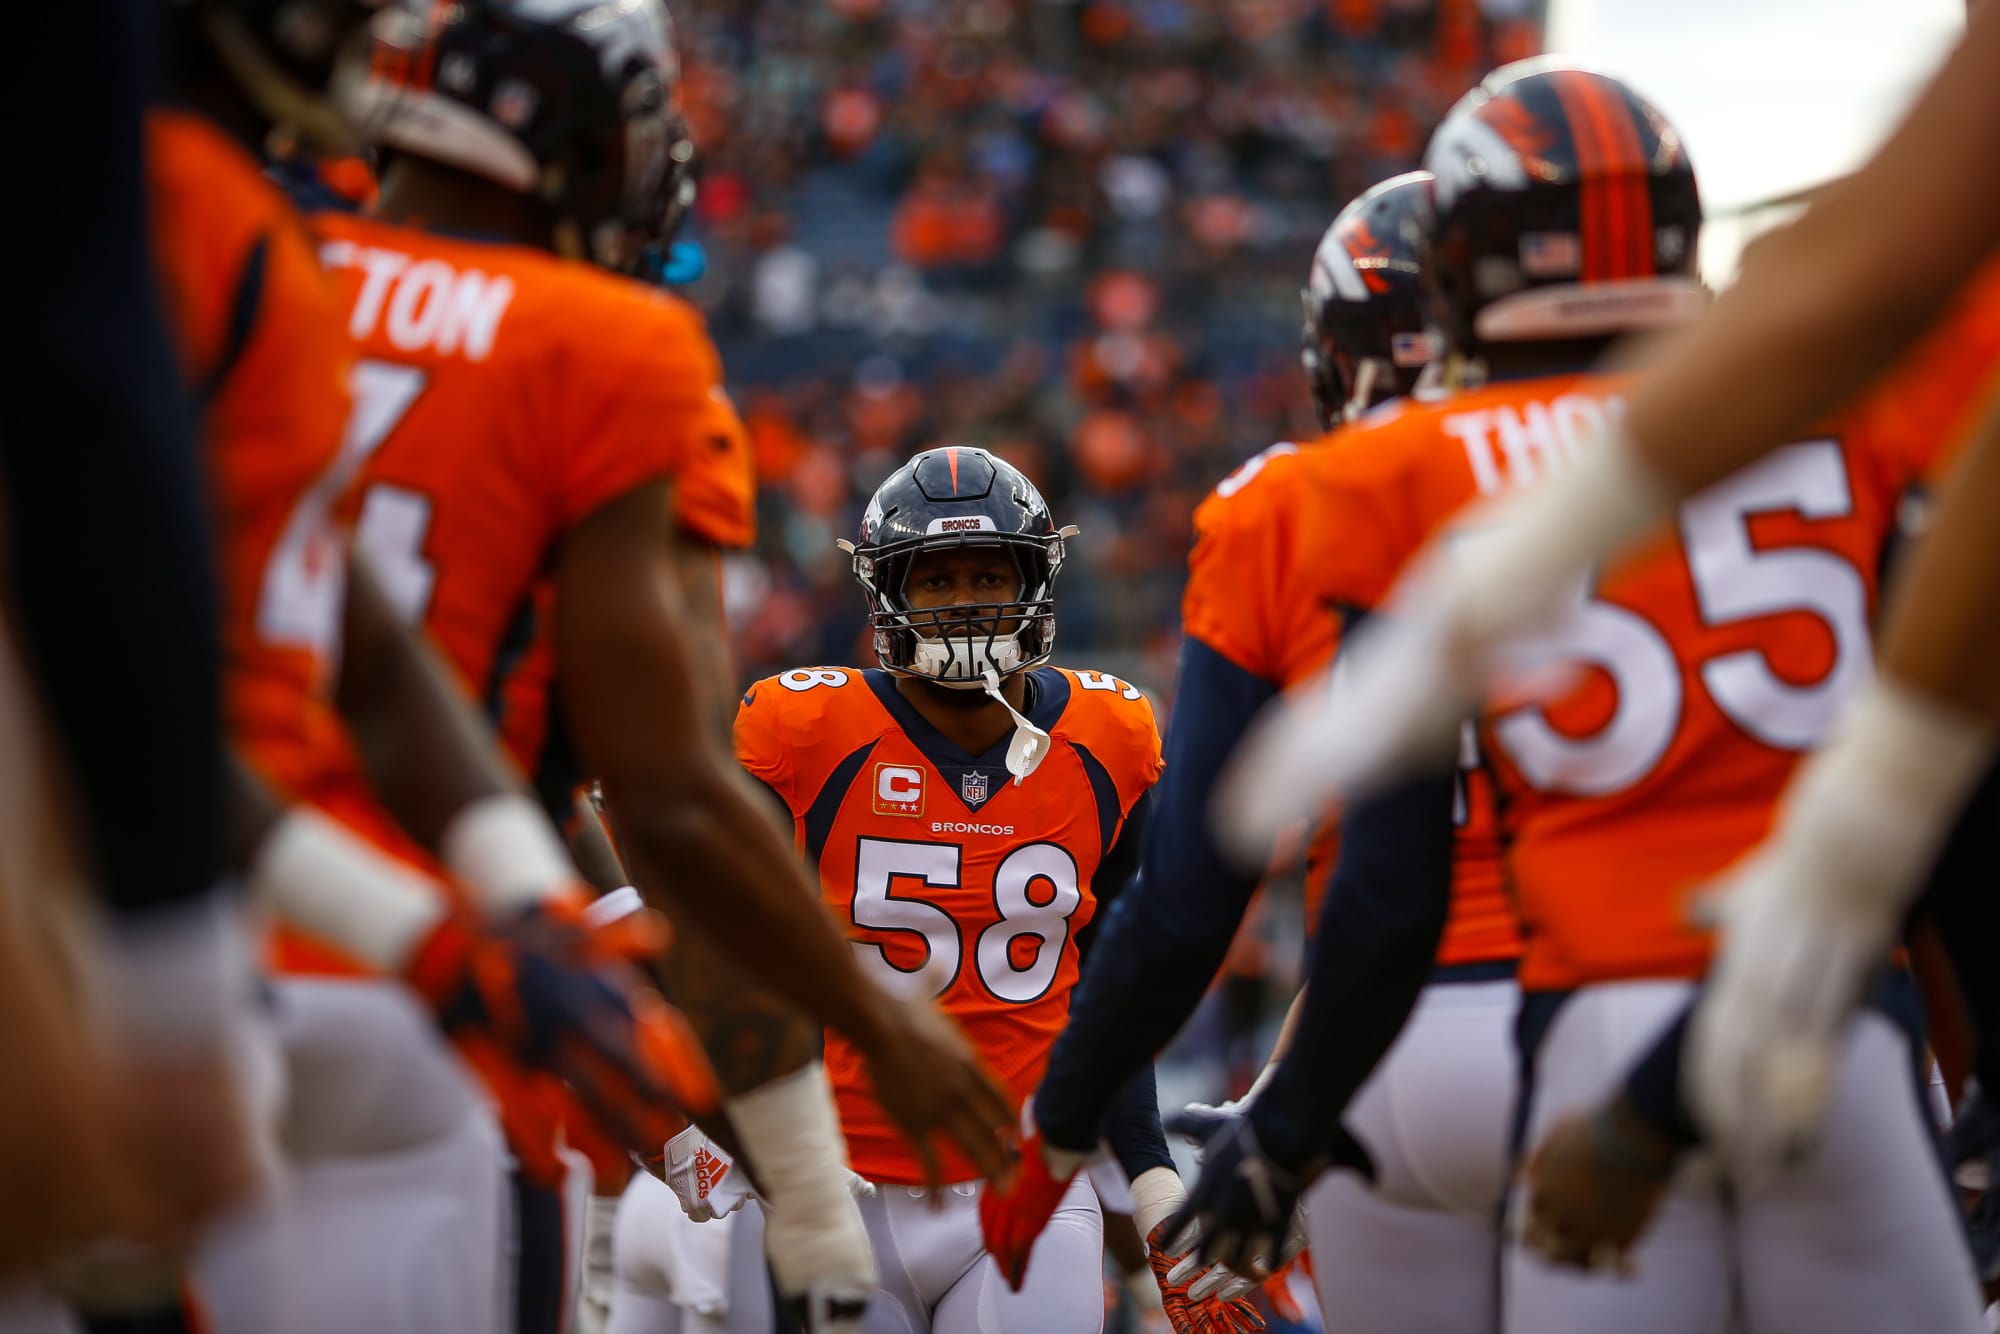 Who are the top10 players on the Denver Broncos?